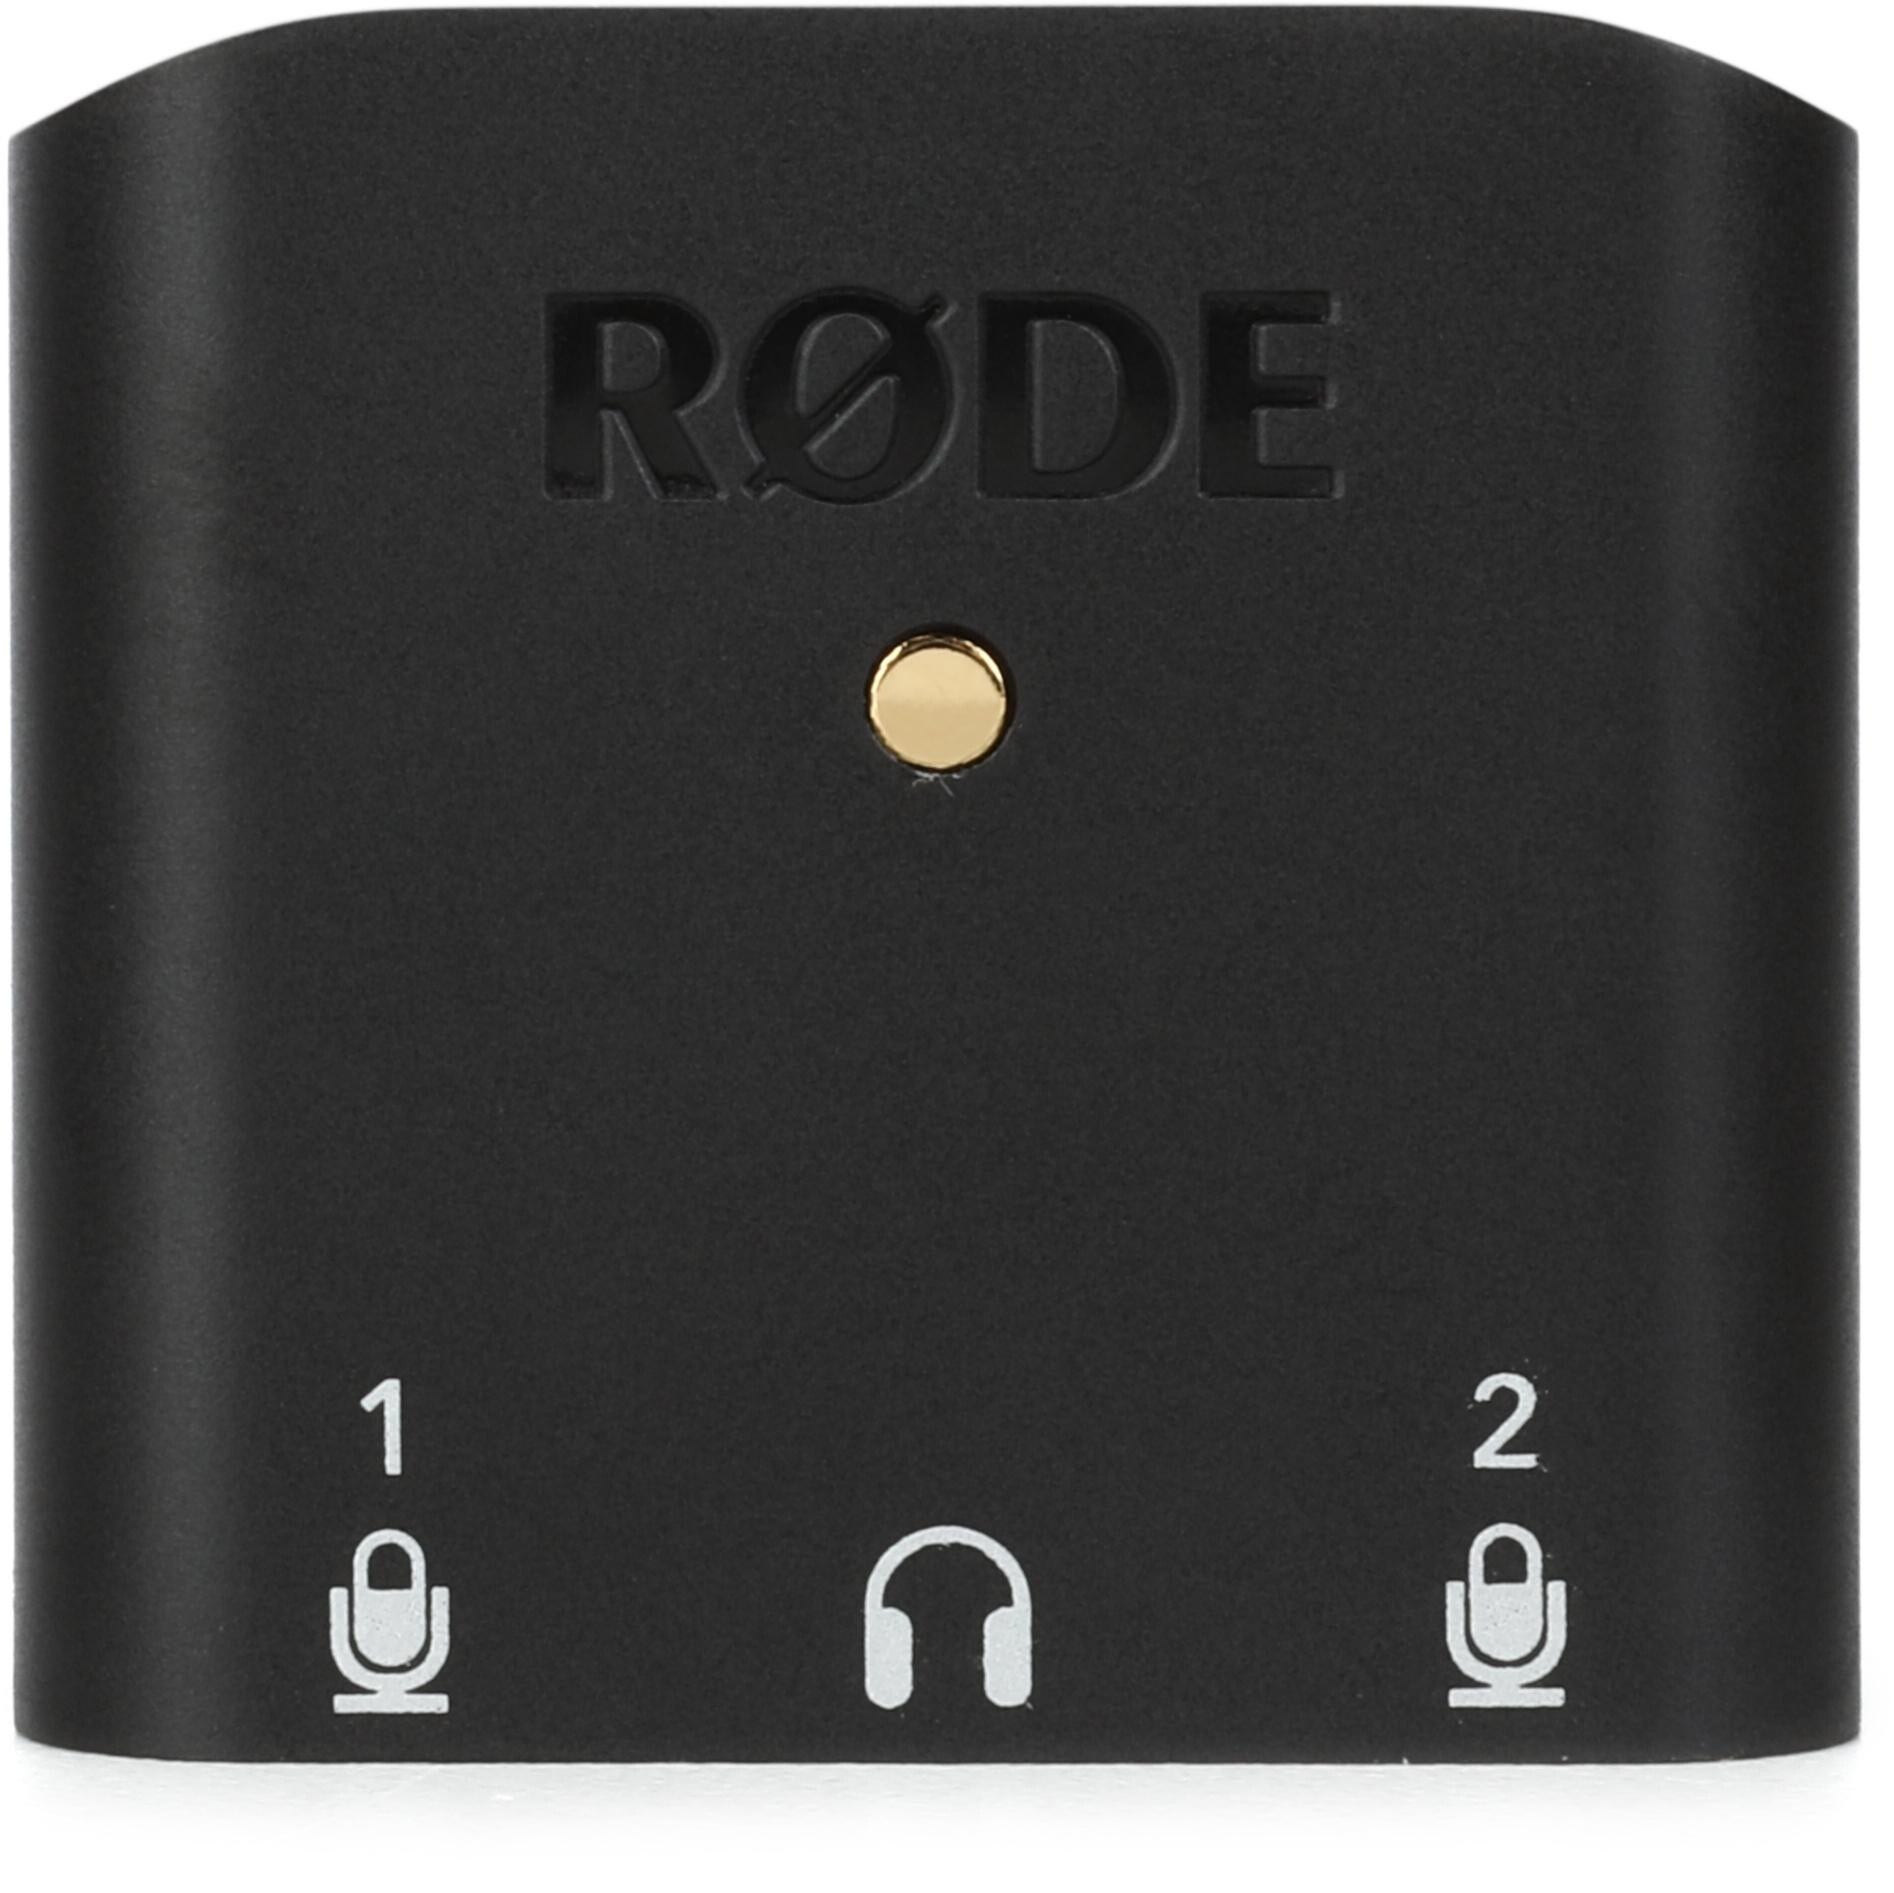 Rode AI-Micro Settings  Using the Rode Central and Rode Reporter